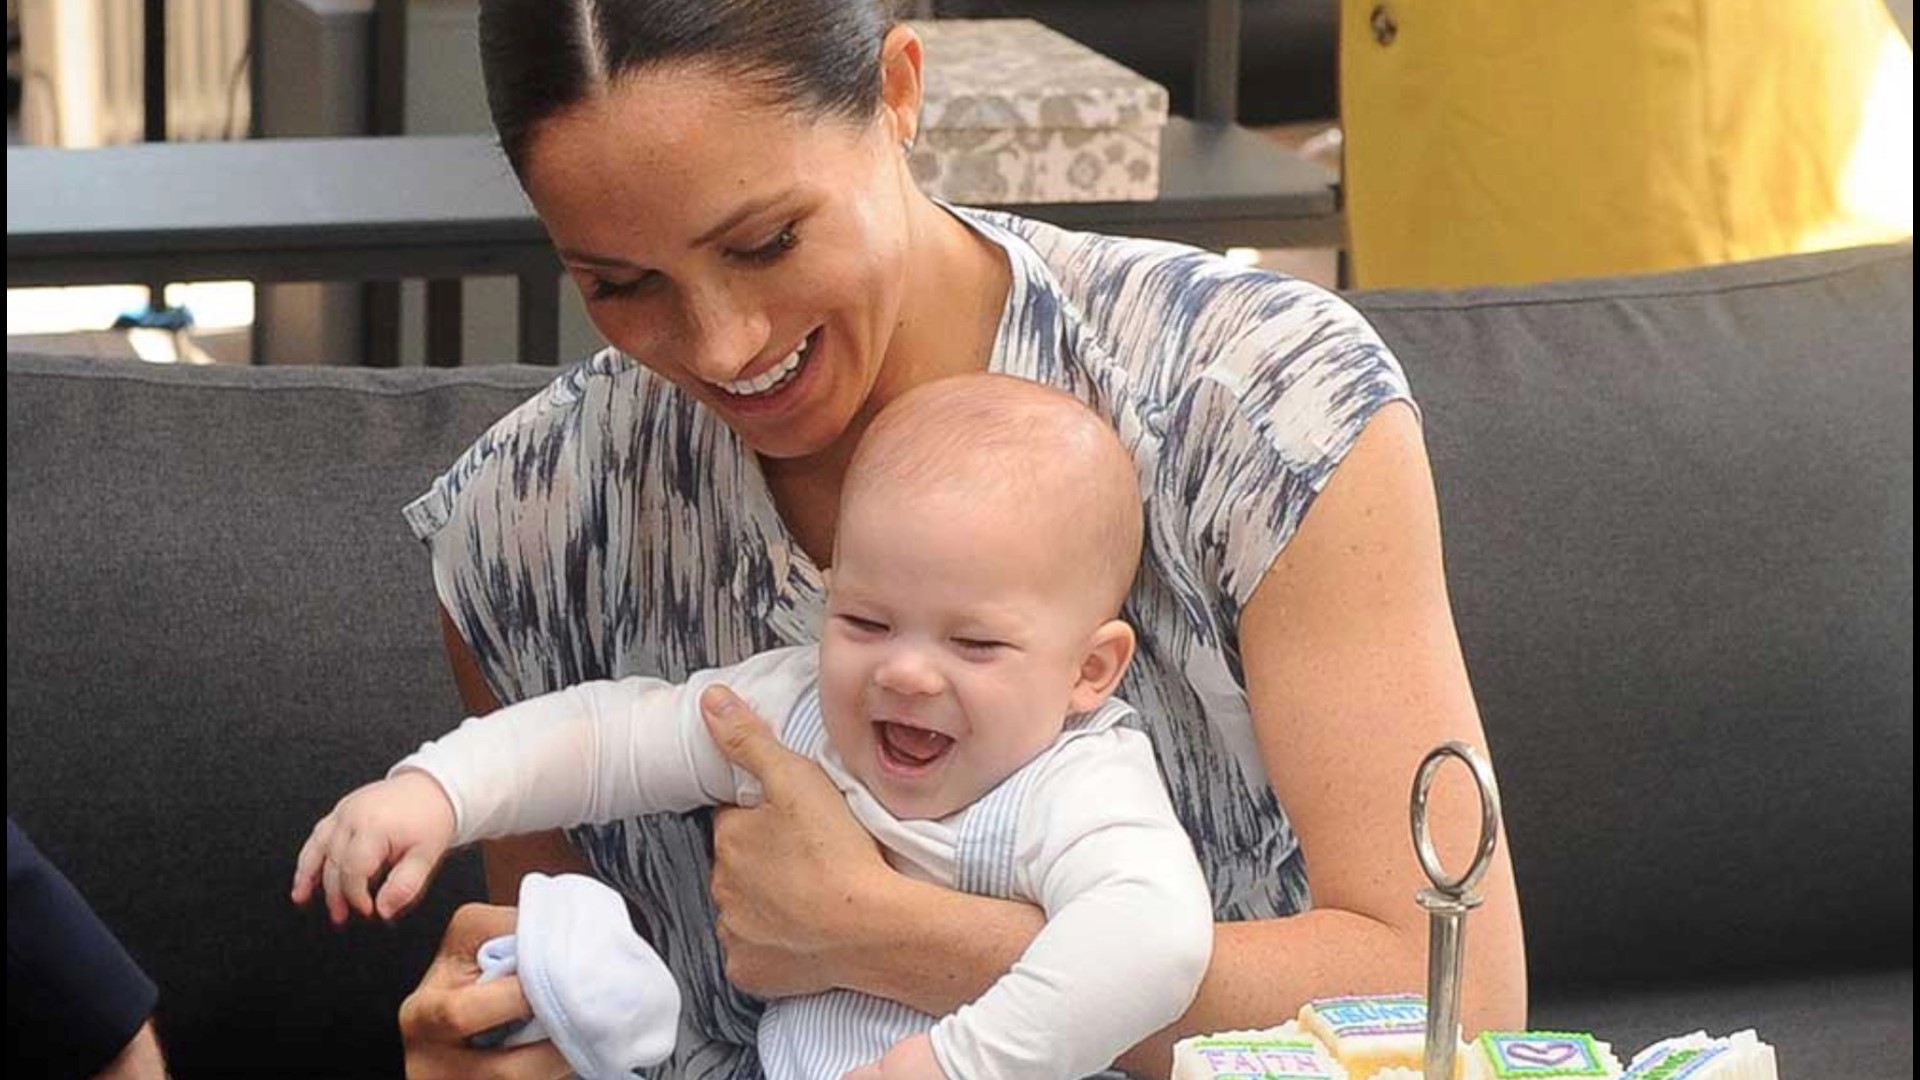 There is an unlikely connection between Meghan Markle and Prince Harry's son Archie, and the Duchess's blog, The Tig. Buzz's Chloe Hurst has the story!